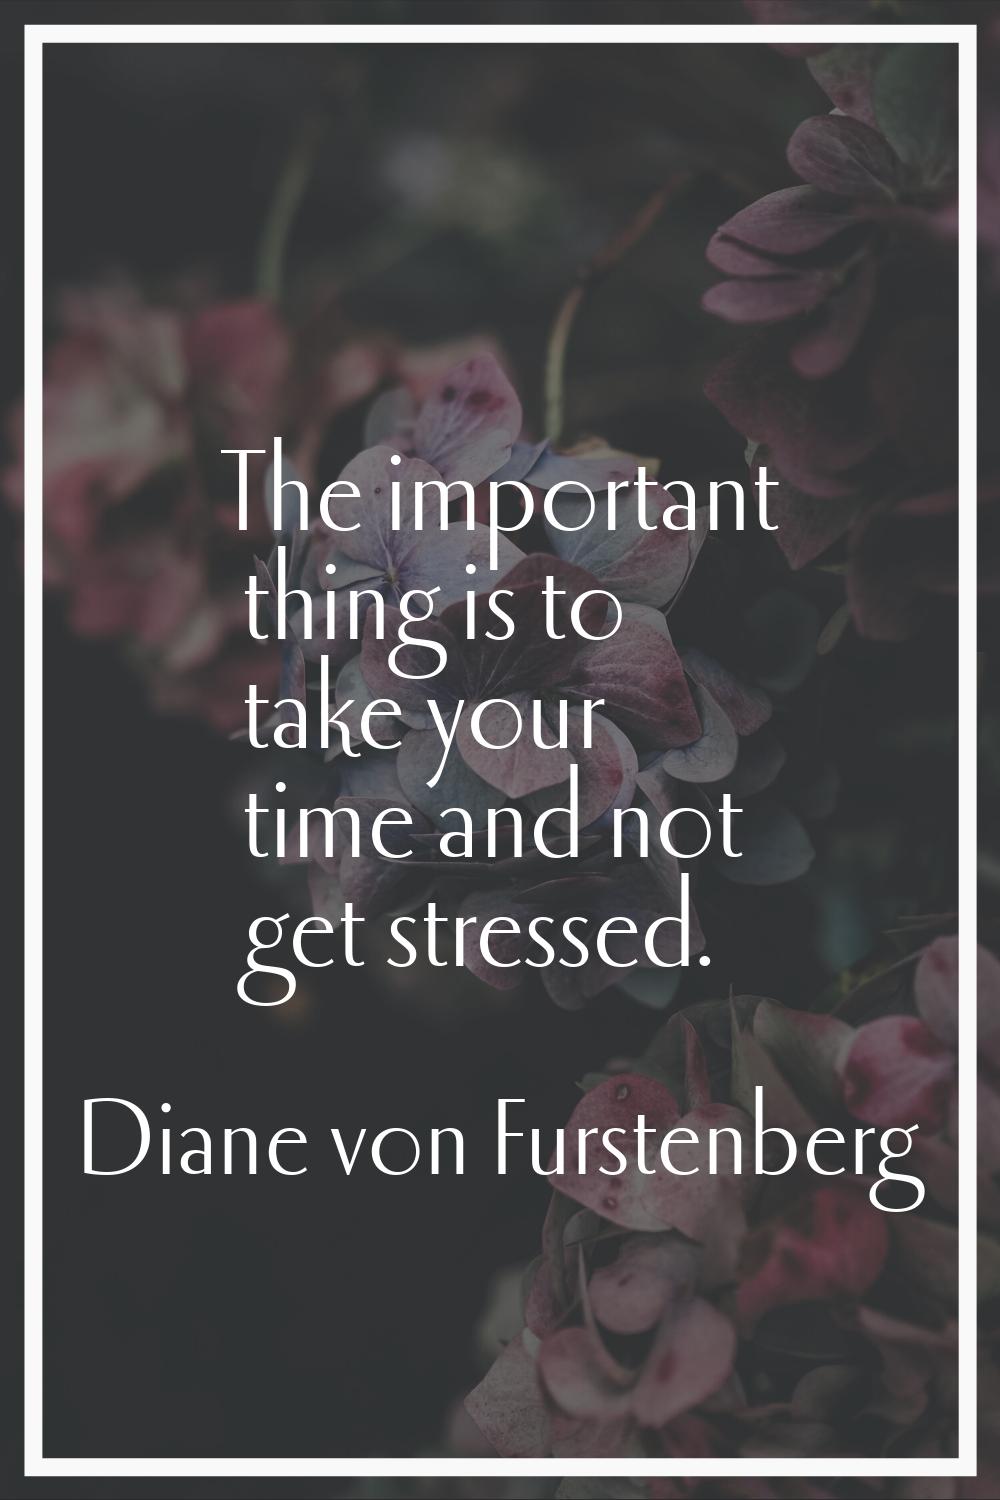 The important thing is to take your time and not get stressed.